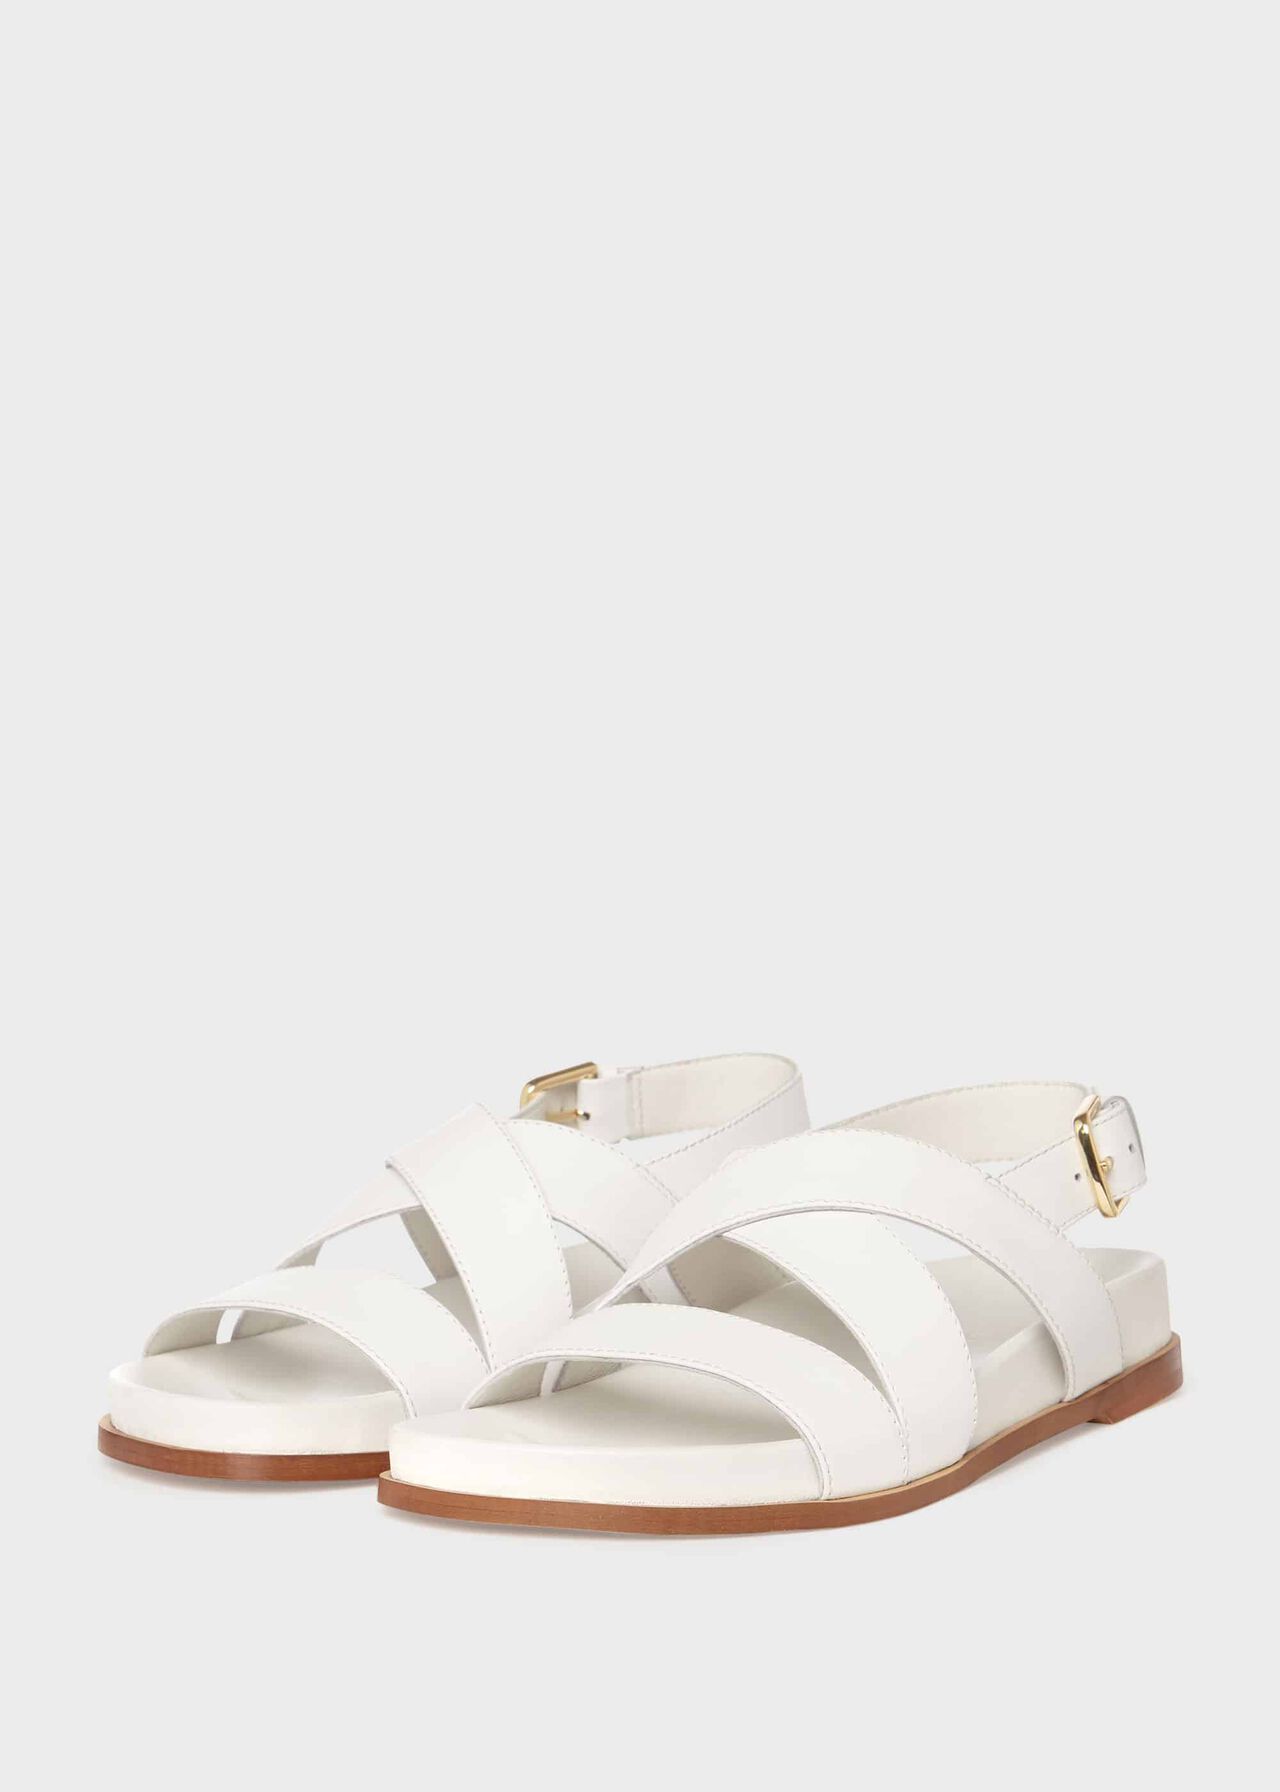 Clementine Leather Sandal, White, hi-res